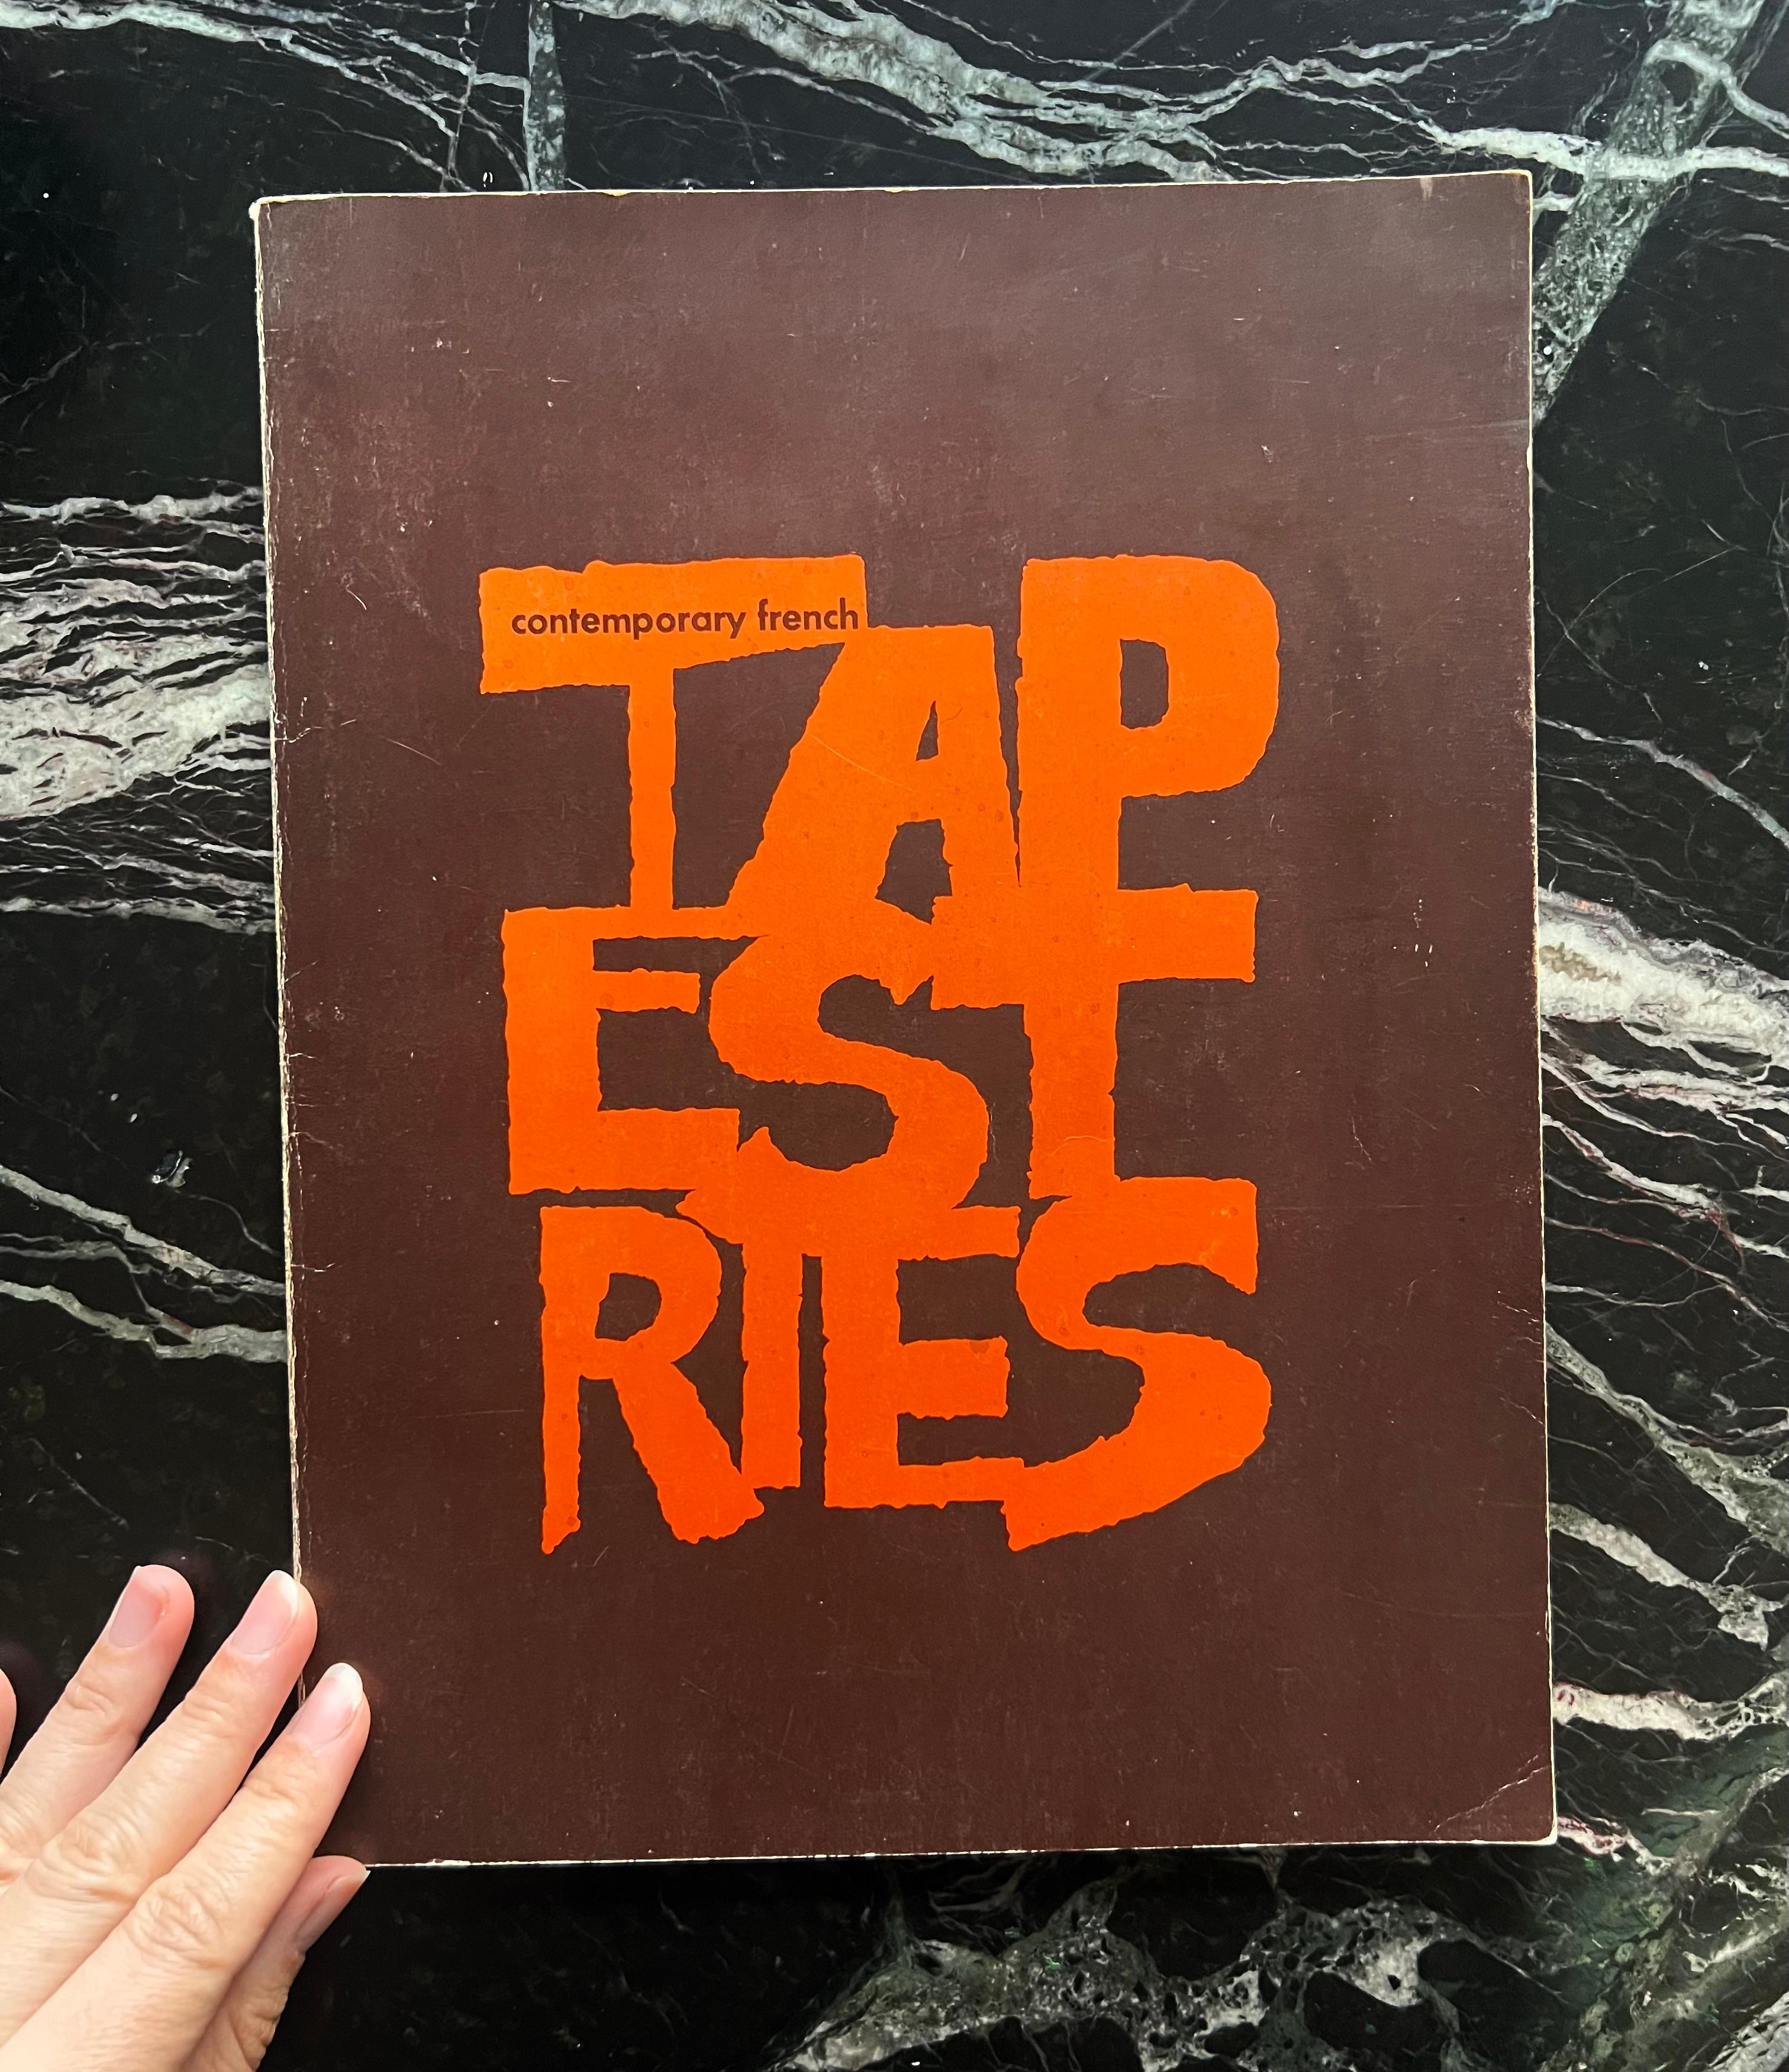 A very rare and collectible coffee table catalogue: Contemporary French Tapestries: New York, Charles E. Slatkin Inc., Galleries, 1965. Paperback. Brown wrap with orange lettering. 40 pp. Numerous color and black and white plates. Includes